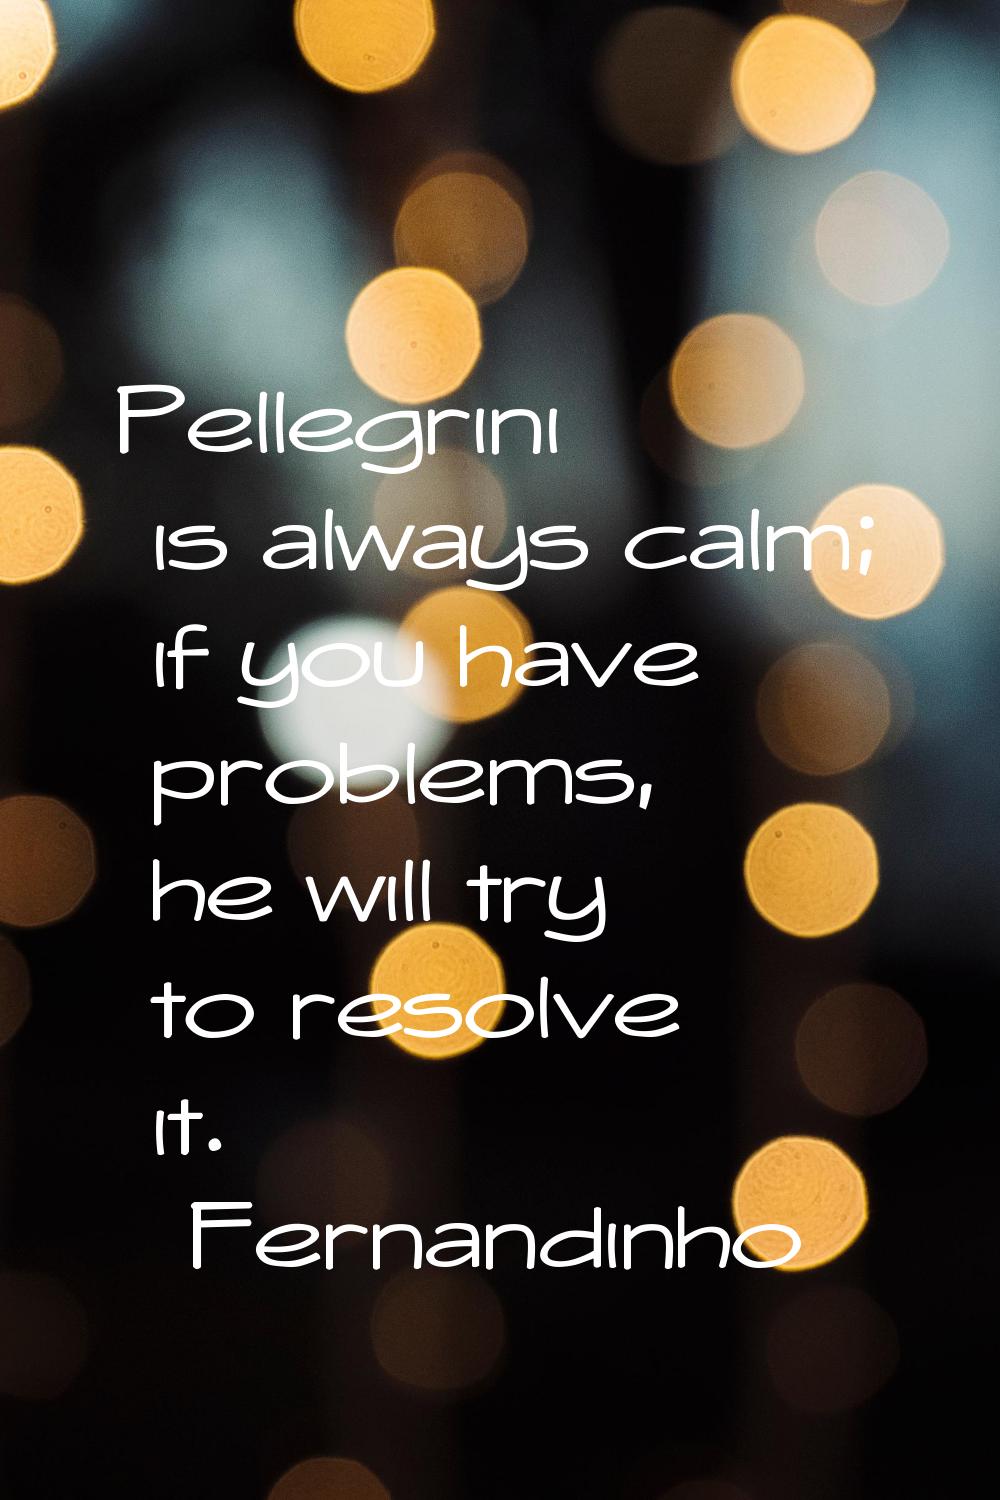 Pellegrini is always calm; if you have problems, he will try to resolve it.